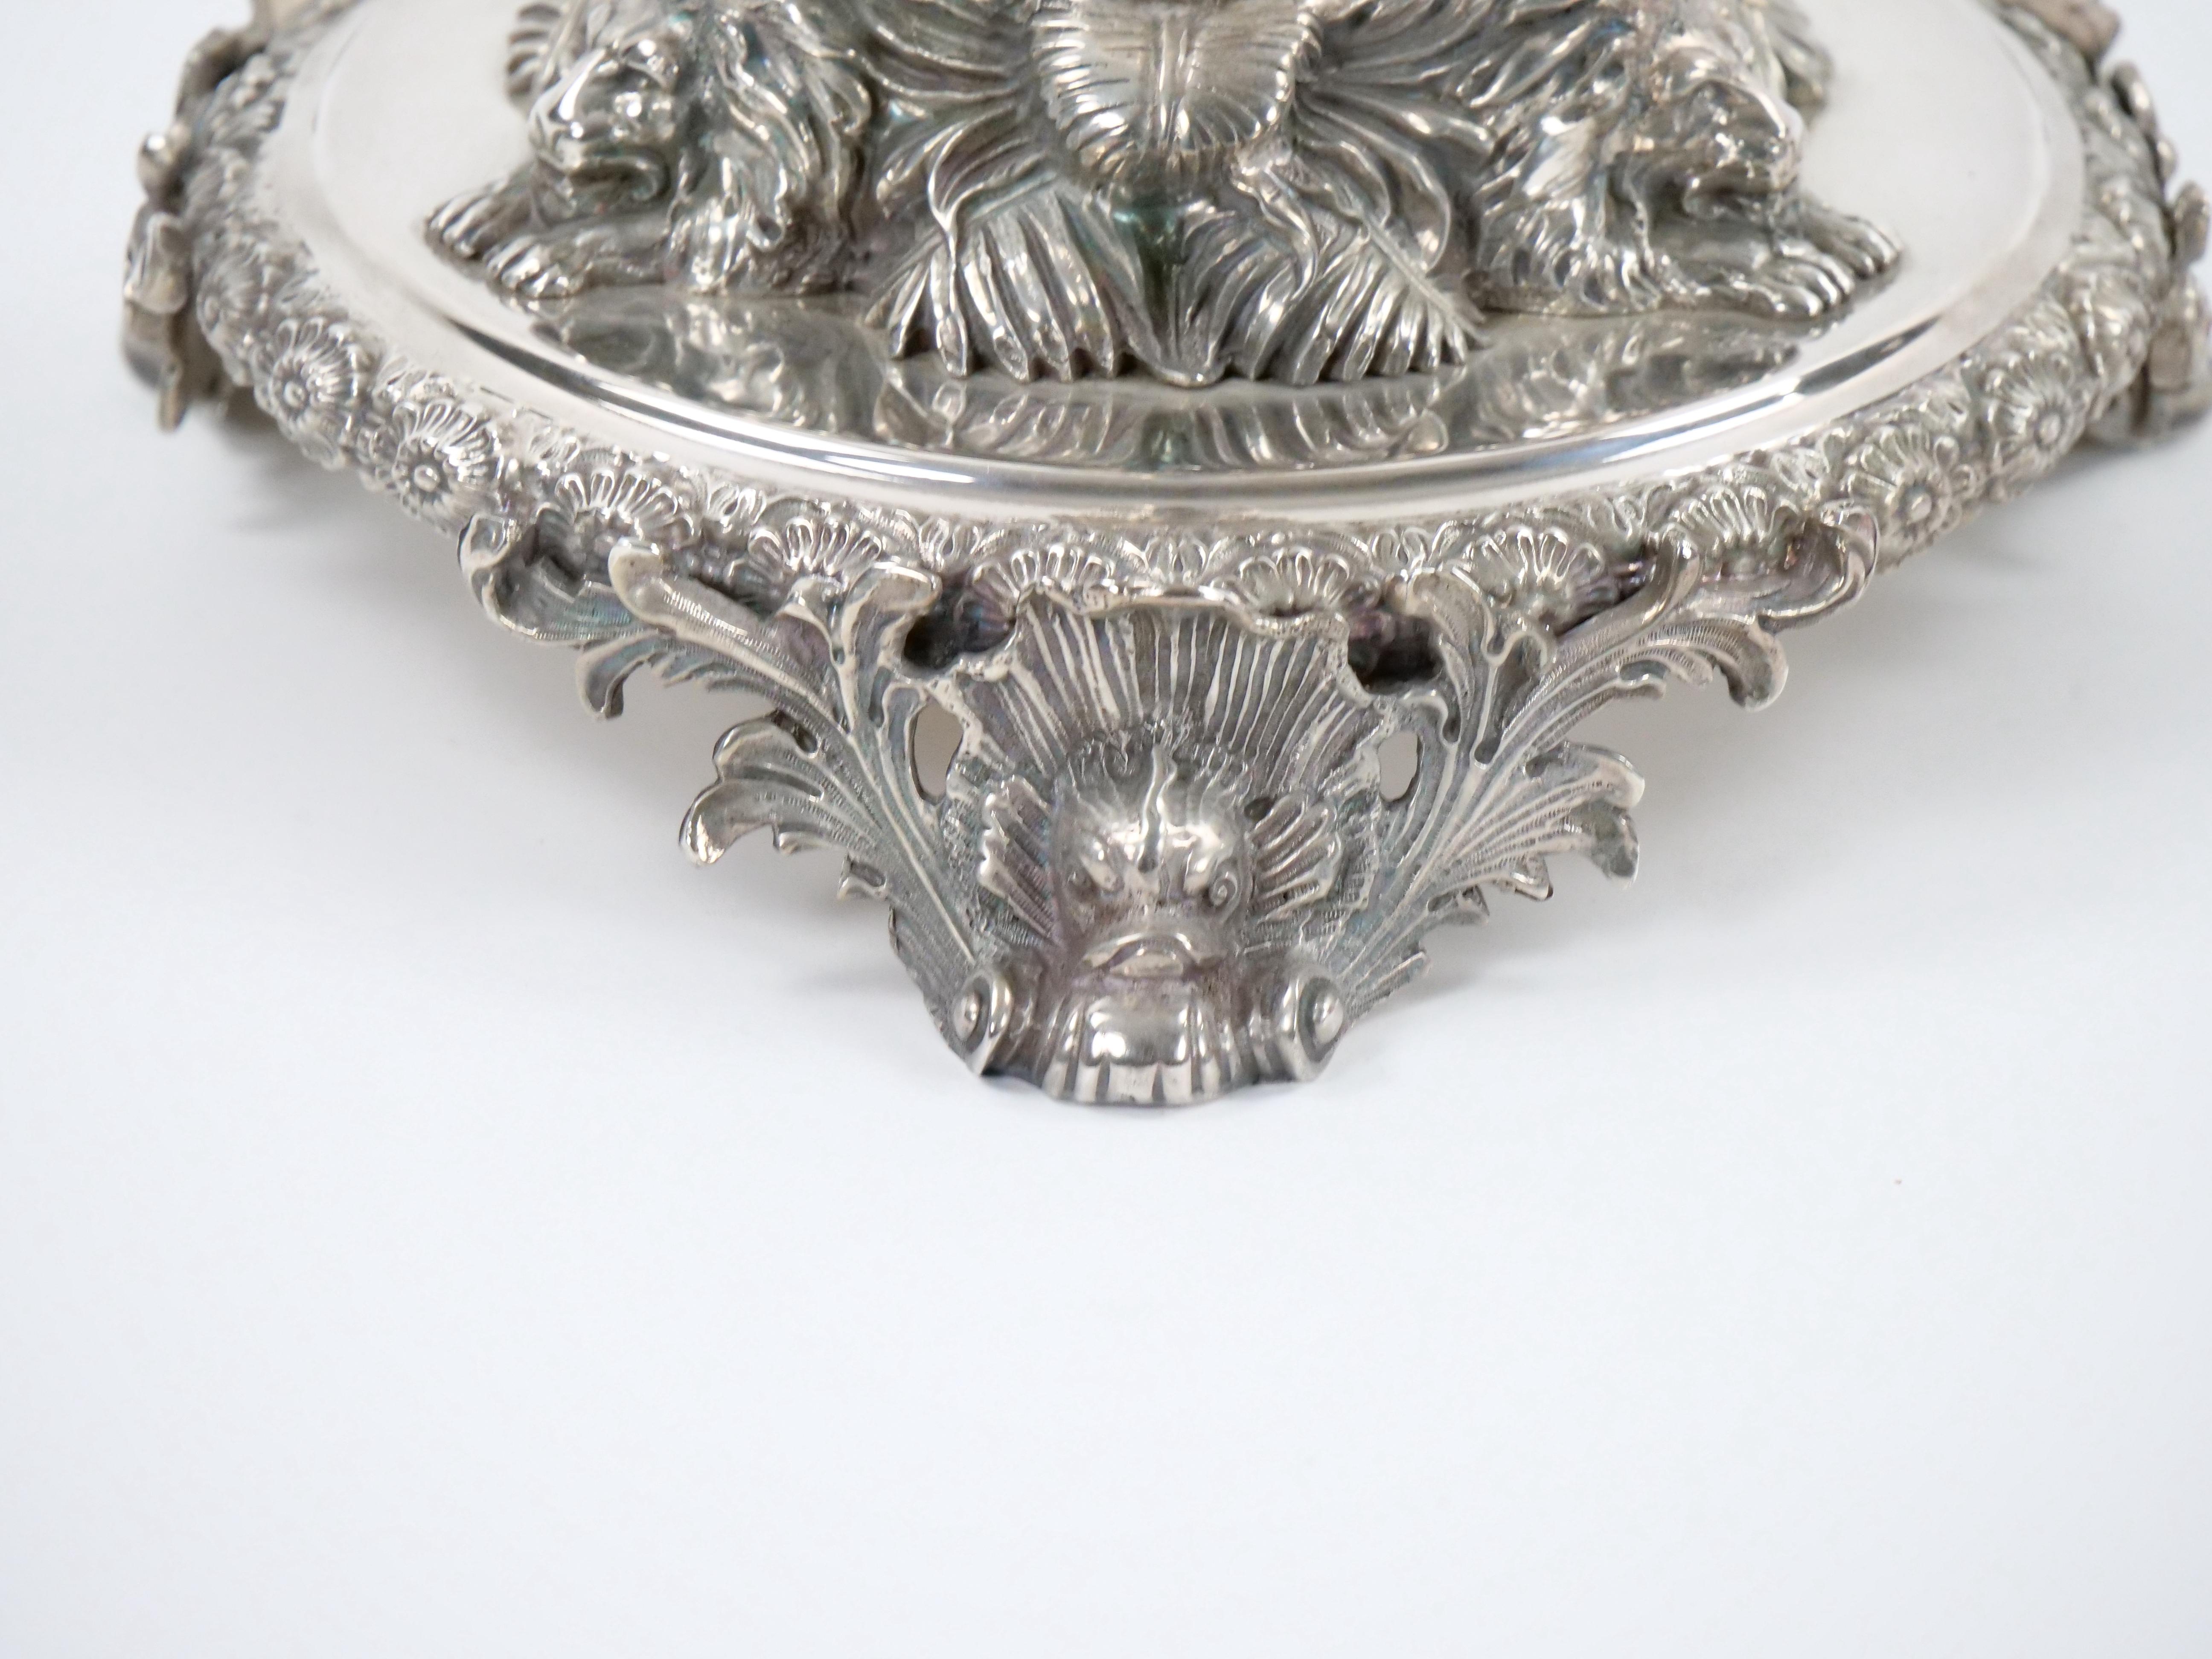 19th Century Georgian Old English Silver Plate and Glass Epergne Centerpiece For Sale 12